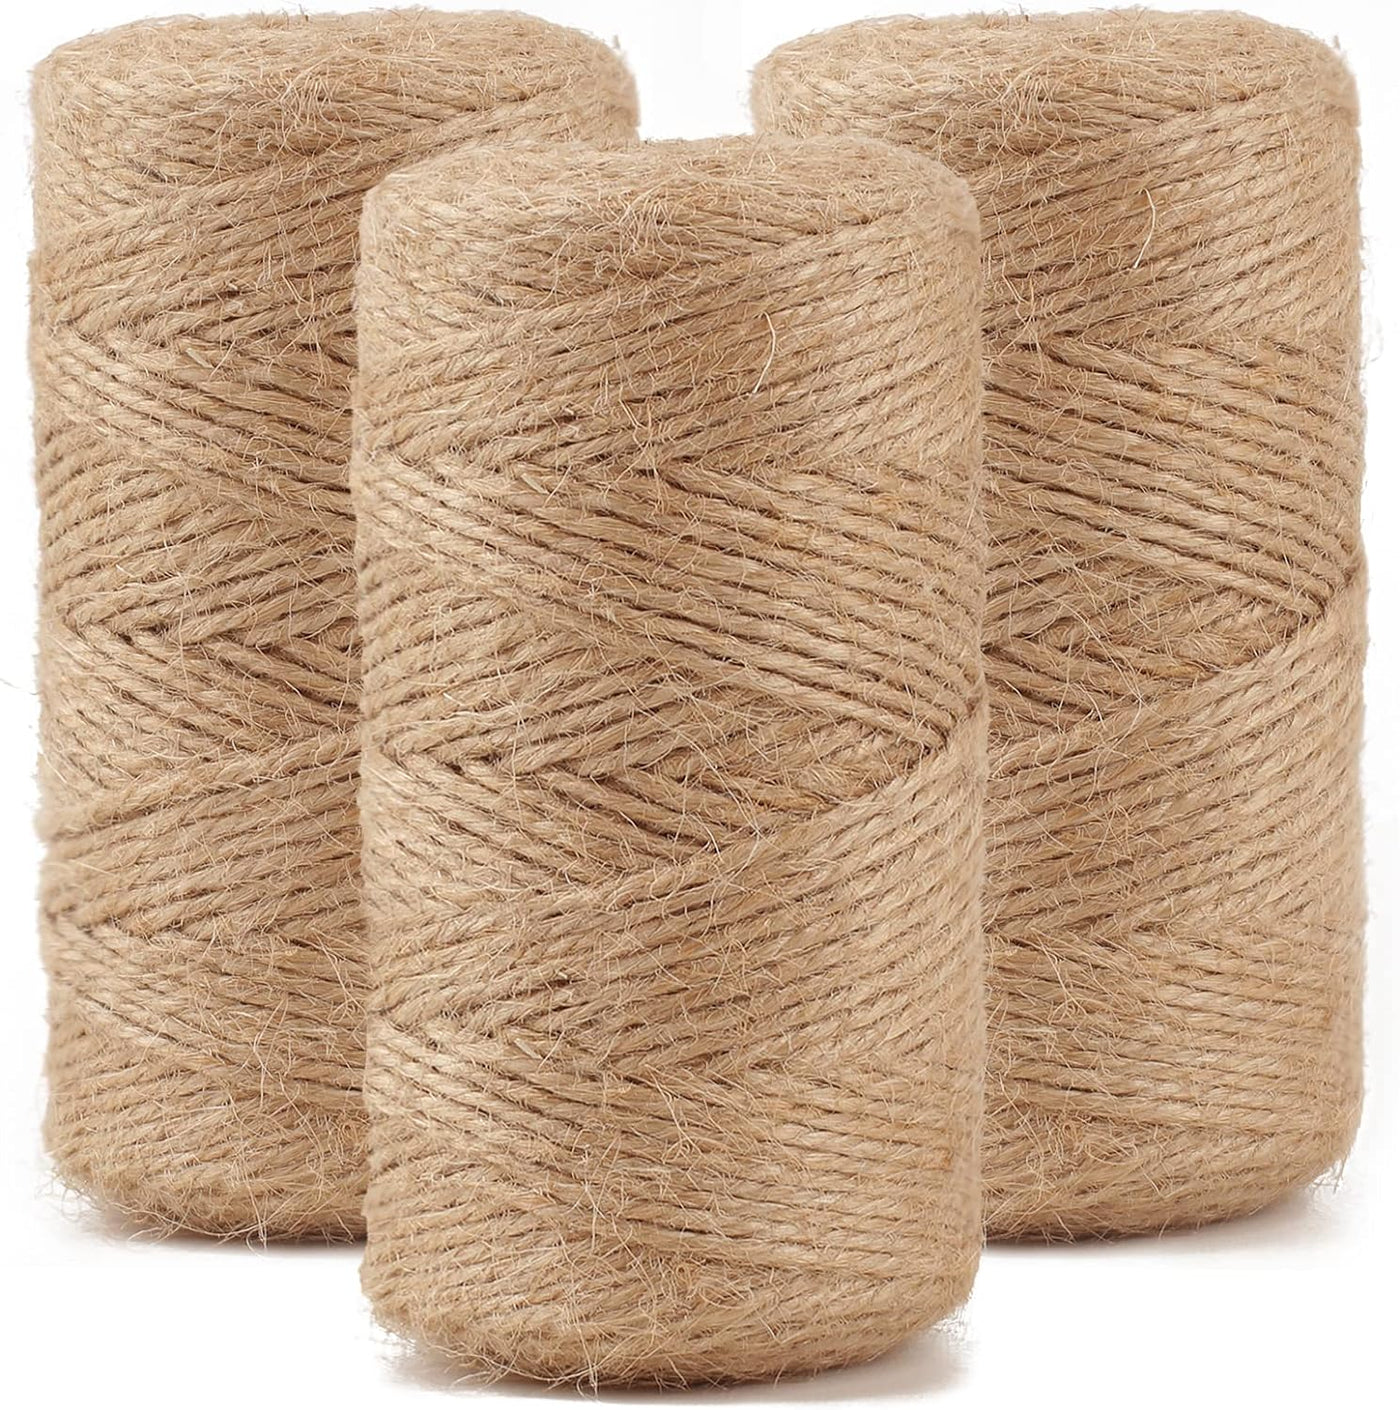 All Purpose Natural Jute Home & Office Twine